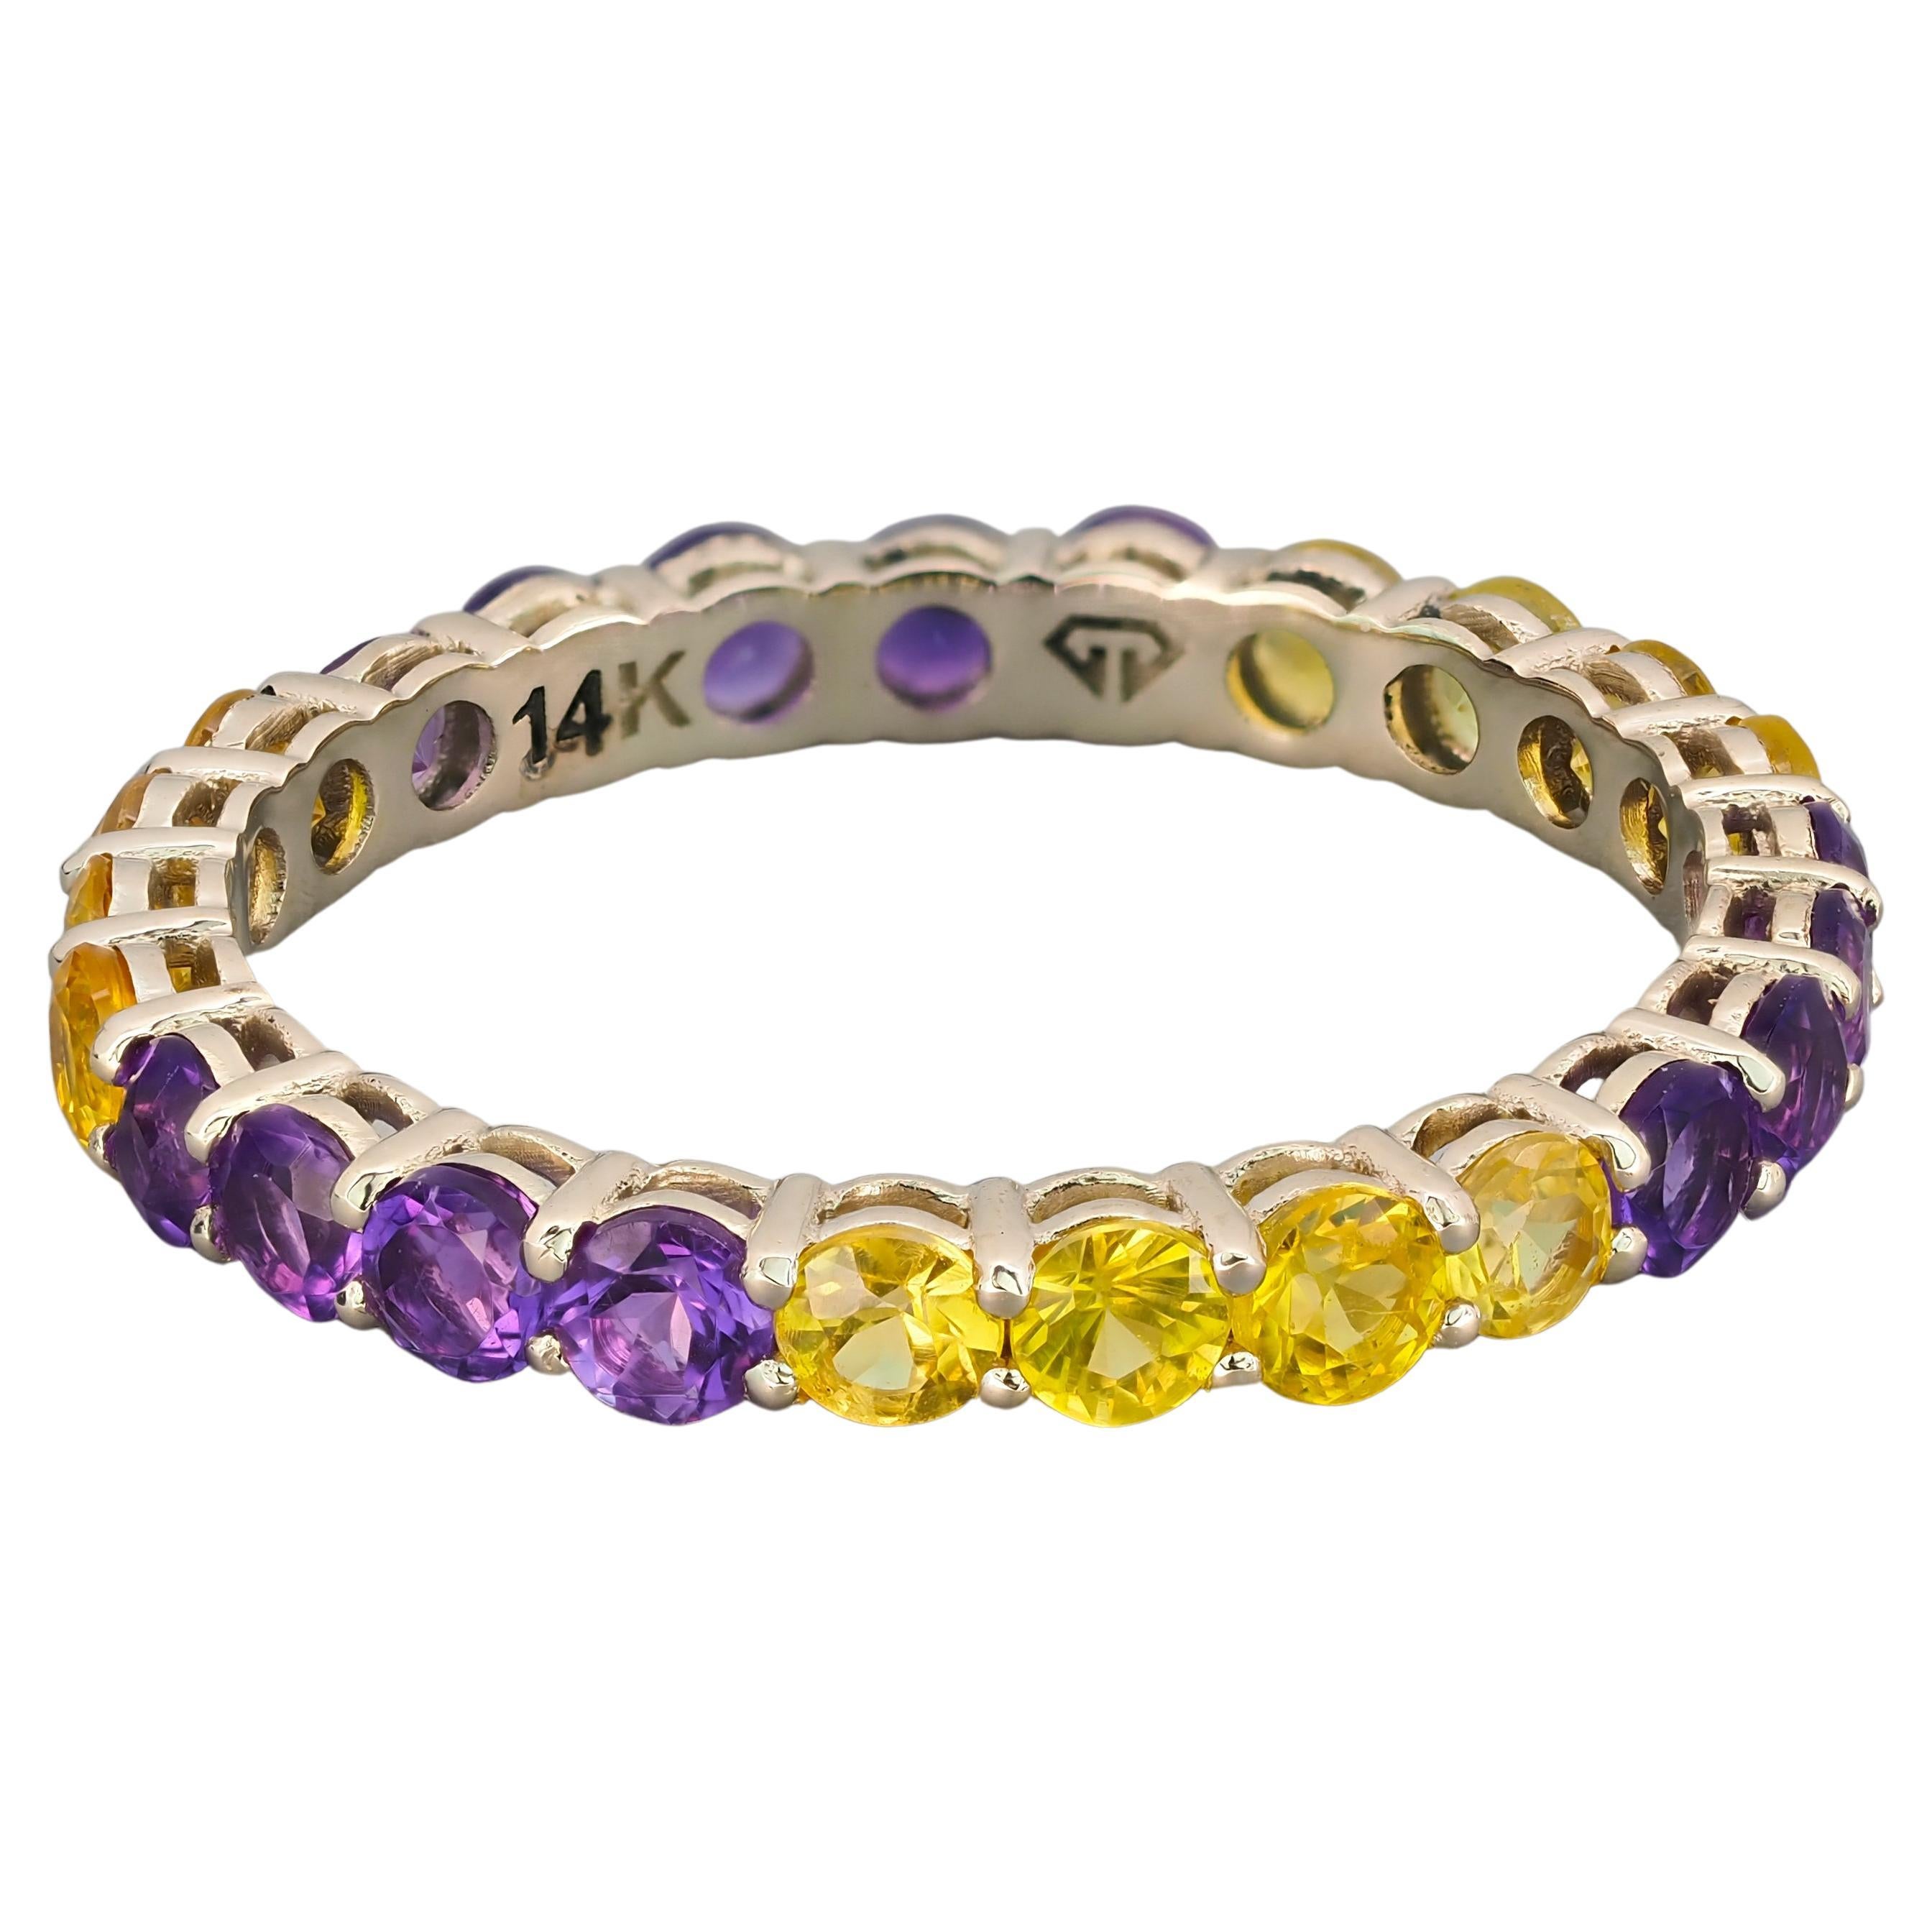 14k Gold Eternity Ring with Sapphires and Amethysts